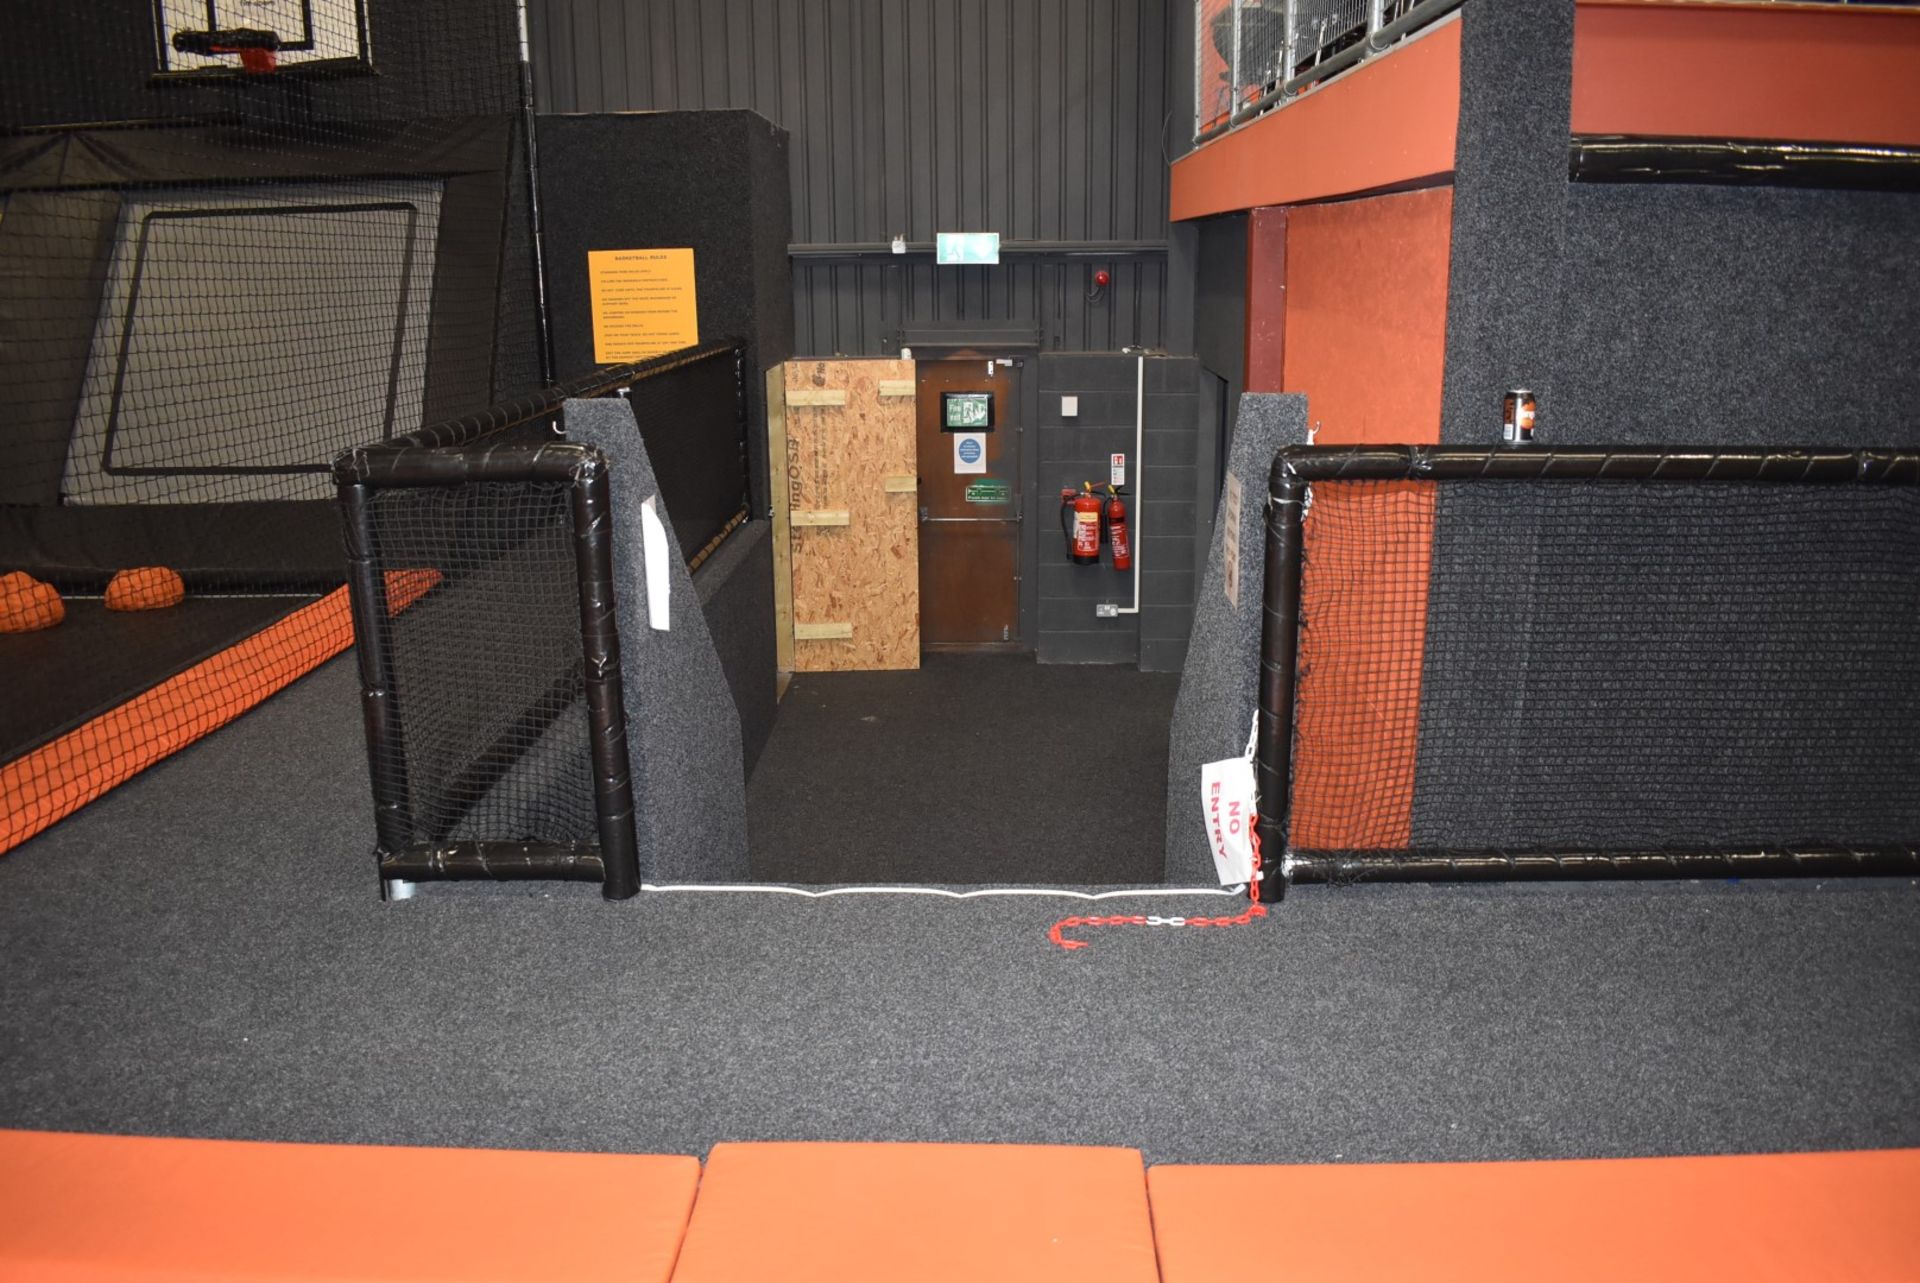 1 x Large Trampoline Park - Disassembled - Includes Dodgeball Arena And Jump Tower - CL766  - - Image 81 of 99